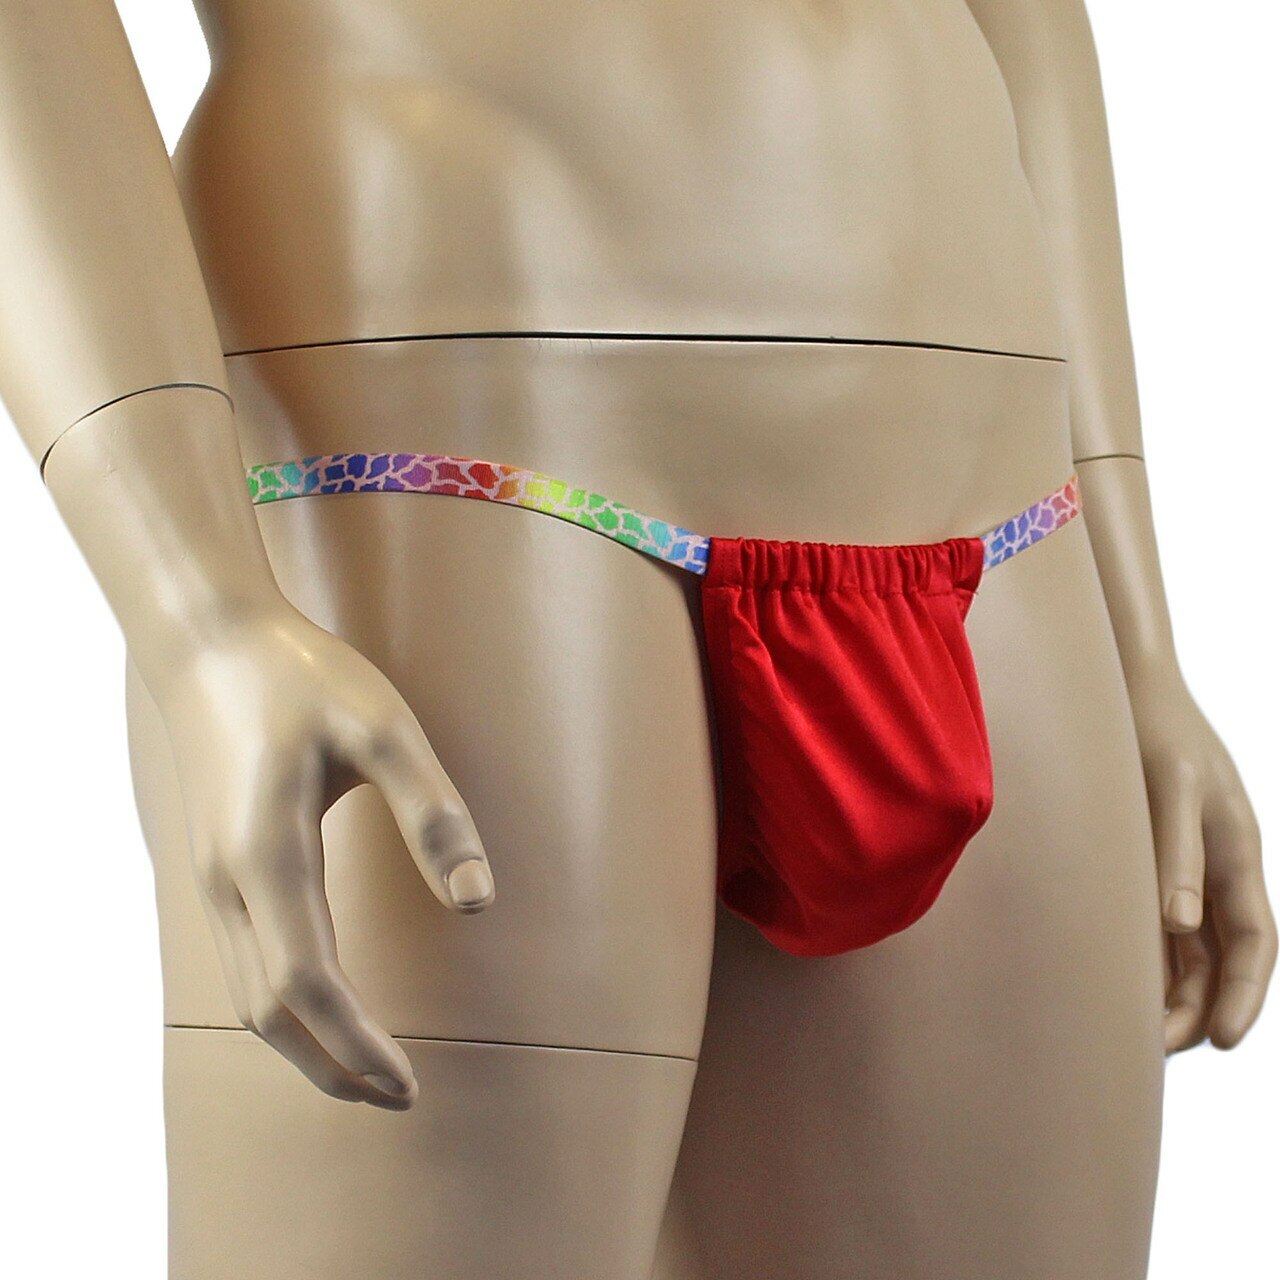 Mens Wild Colourful Adjustable Ball Bag Pouch G string Underwear Red